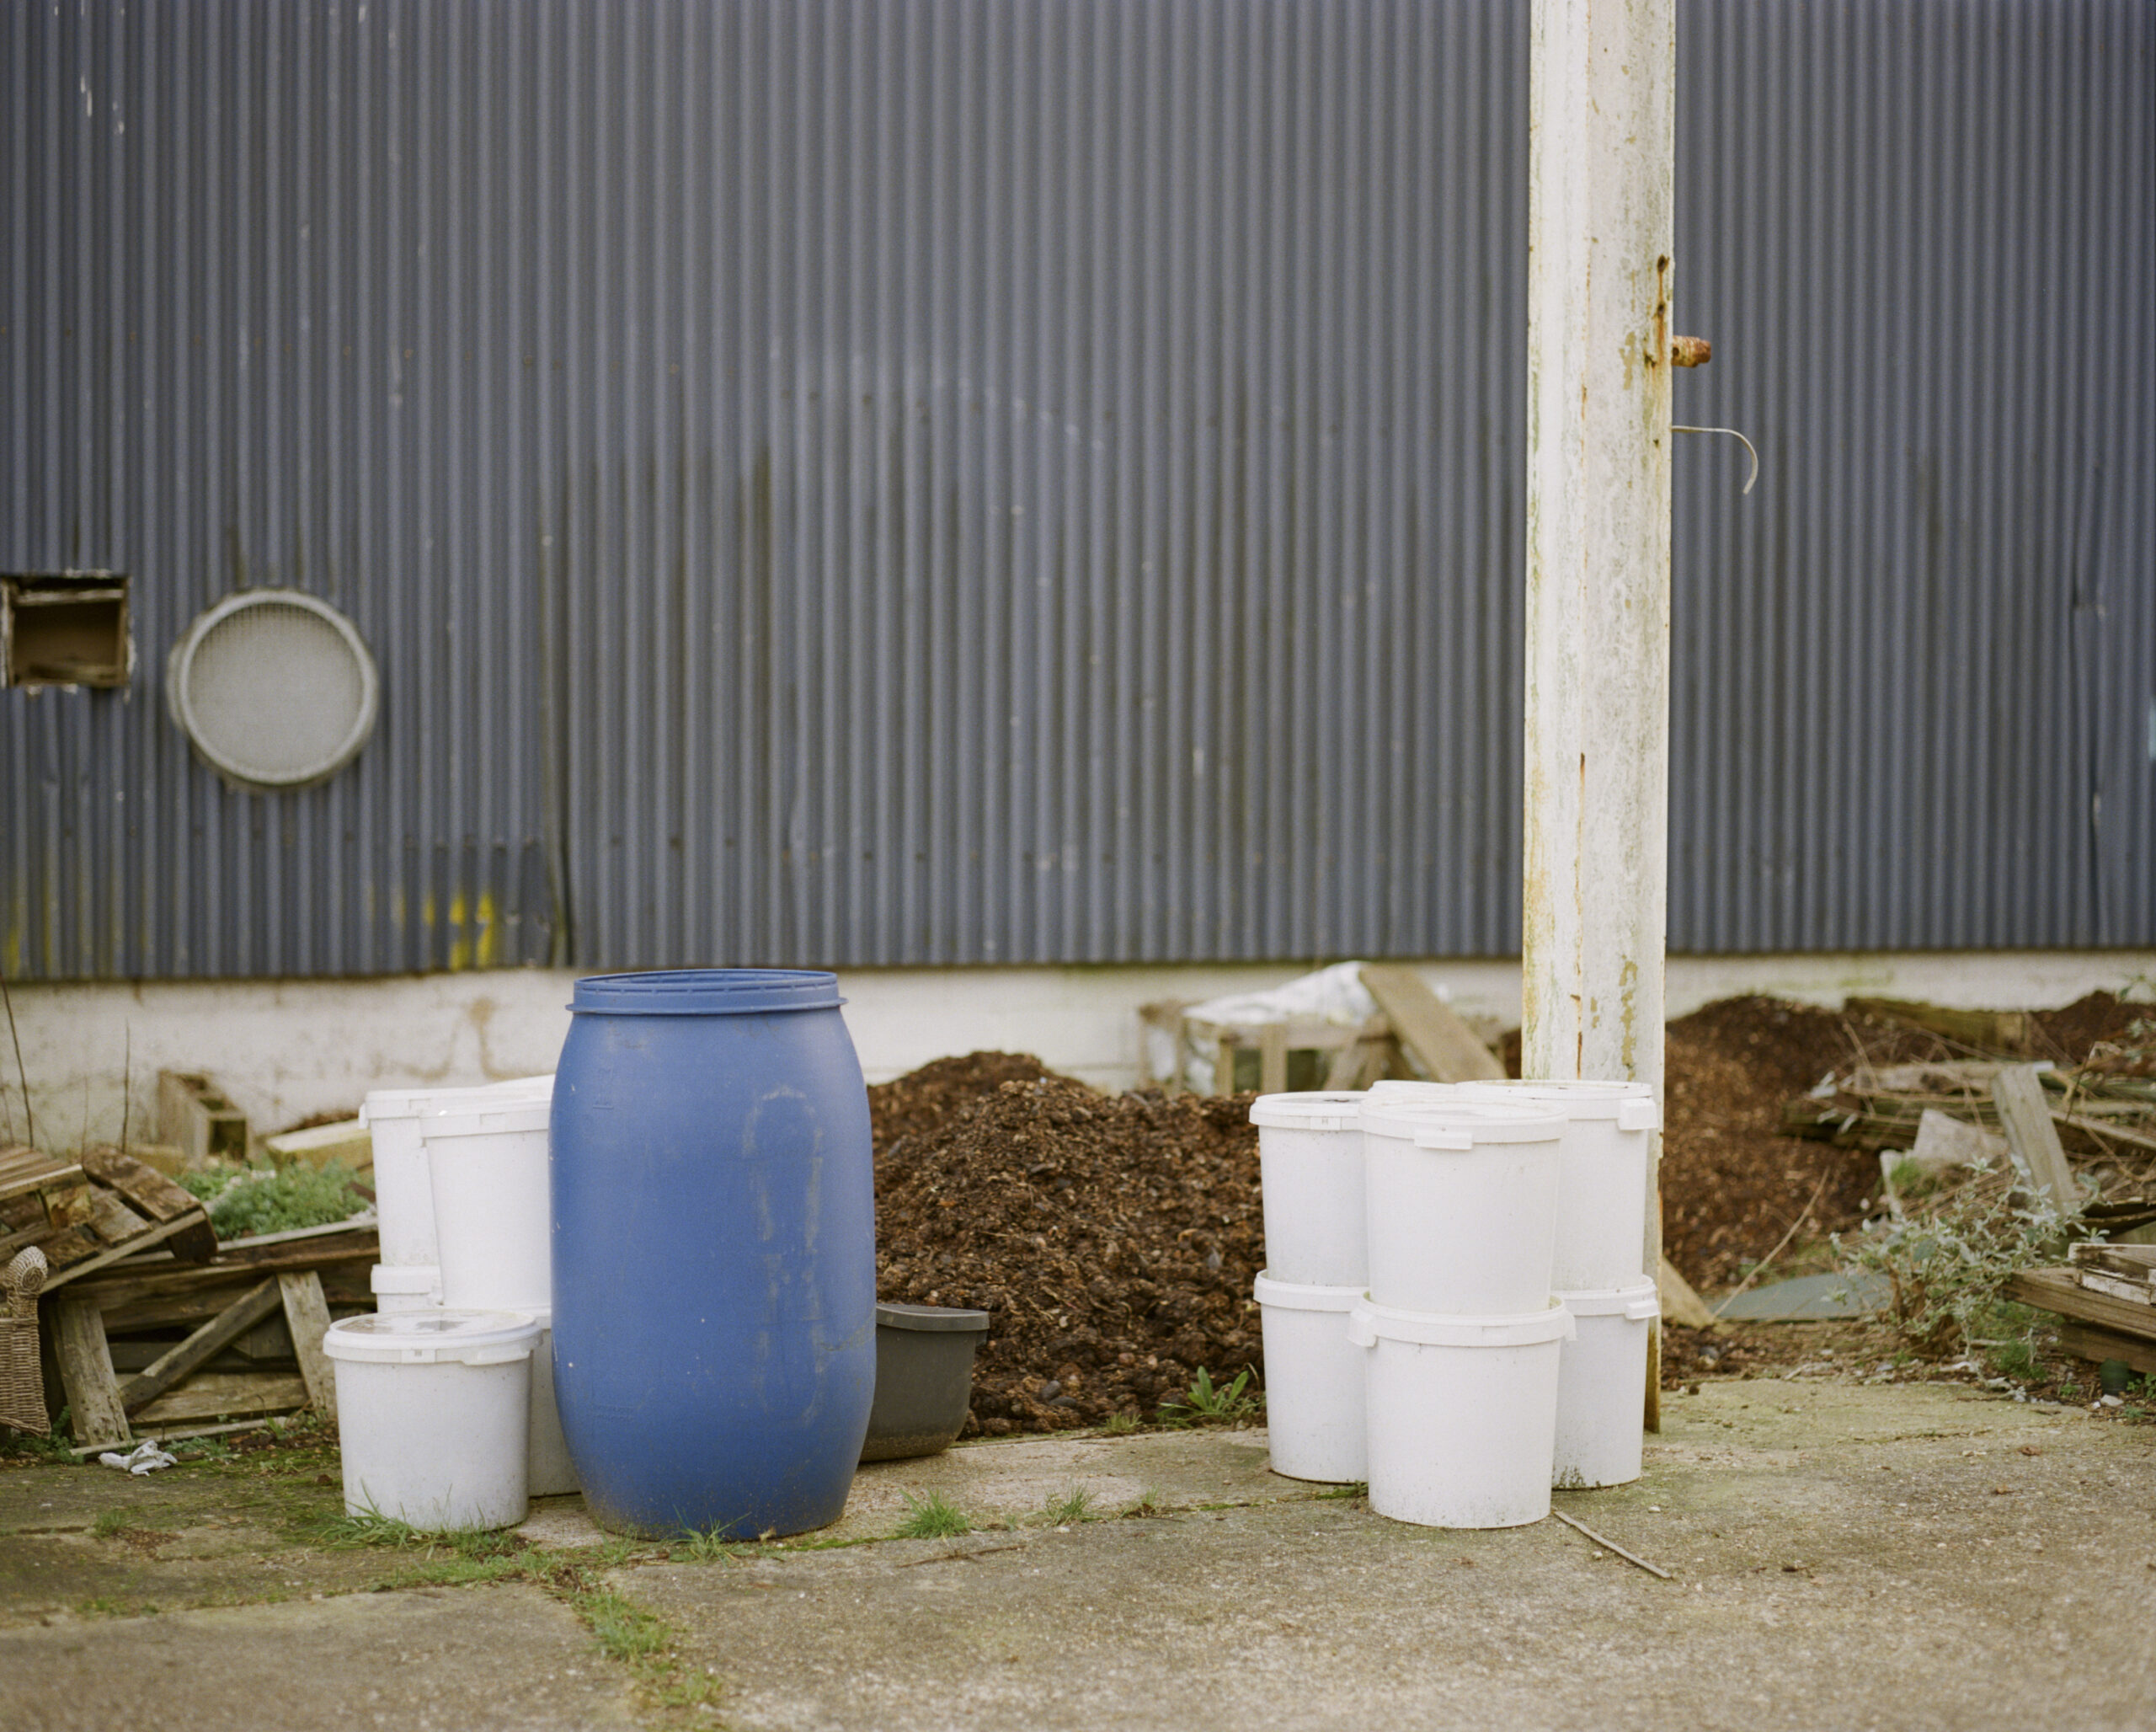 In front of the wall of a shed are piles of compost. In front of the compost are white buckets that Michael uses to collect food waste.